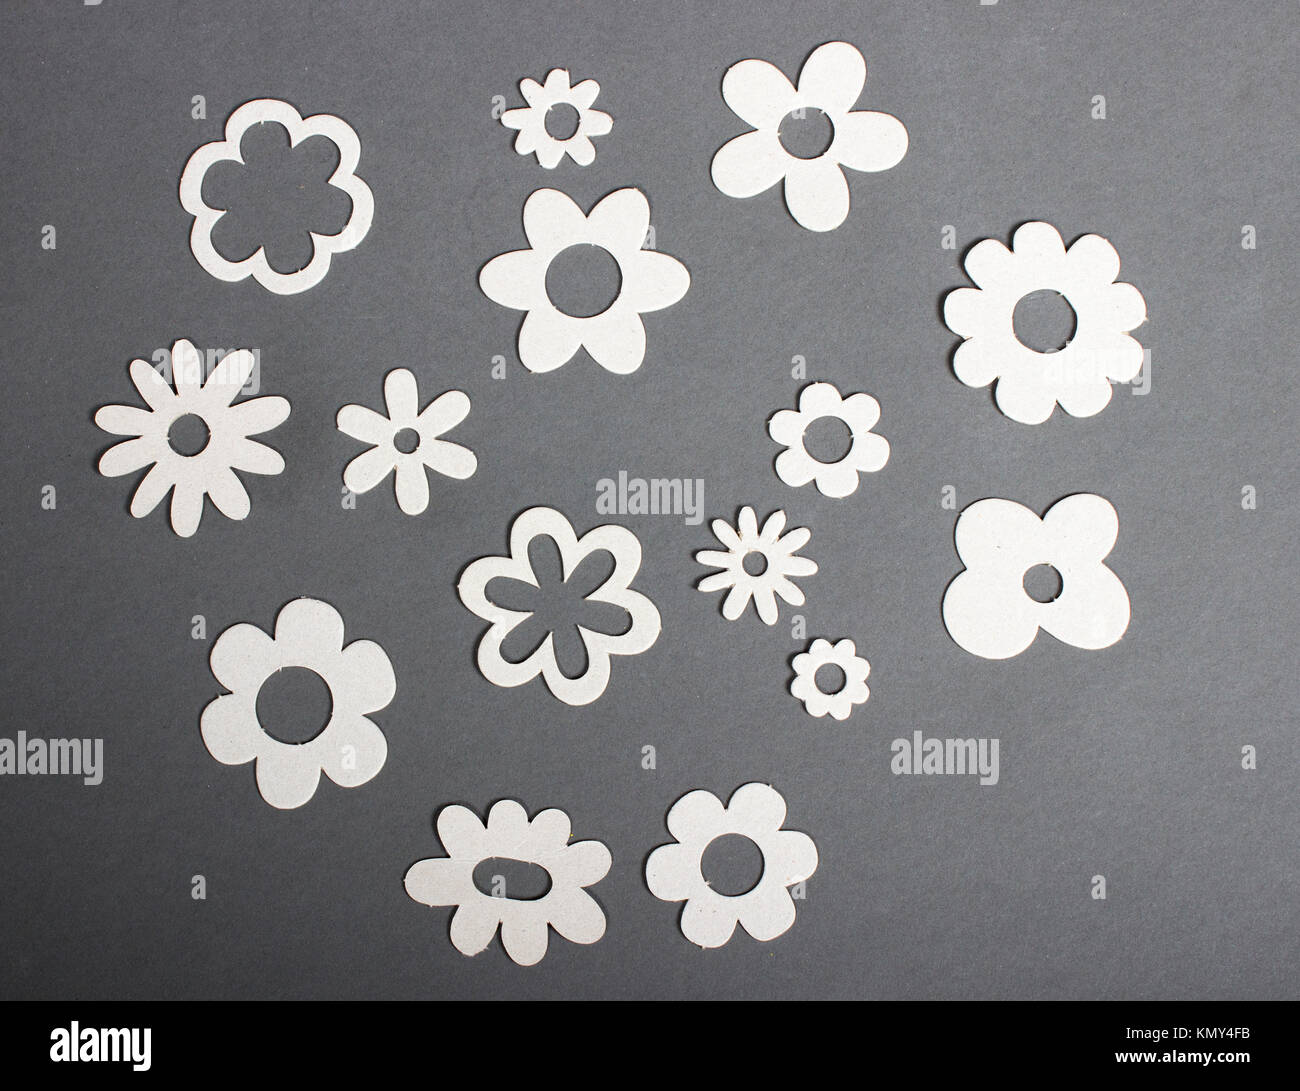 black and white flower background with various flower outlines and shapes, daisies, posy Stock Photo